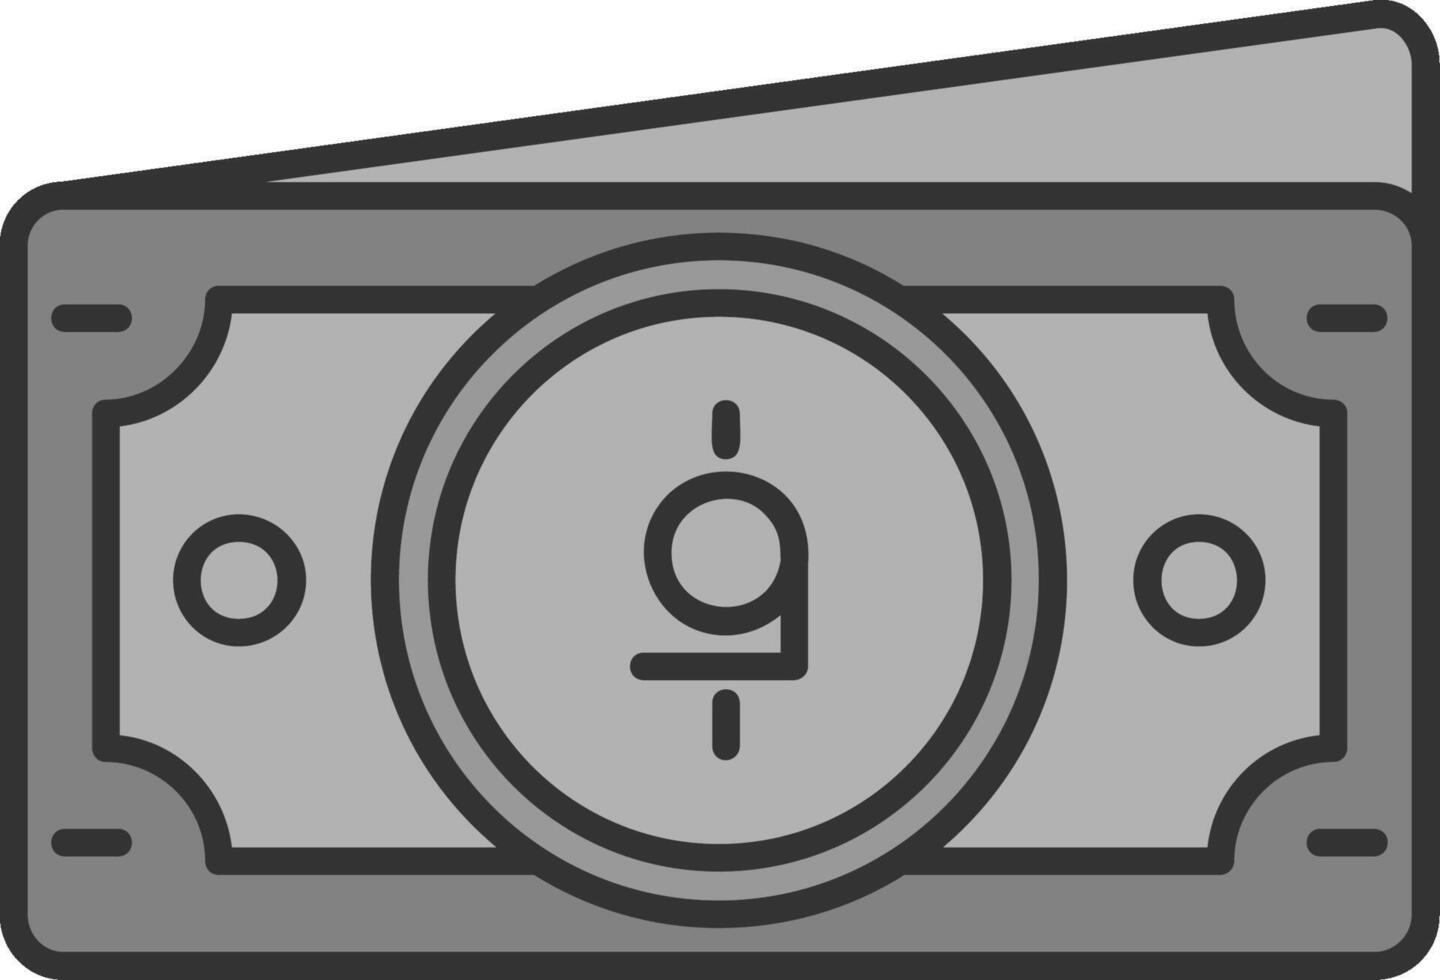 Afghani Line Filled Greyscale Icon vector